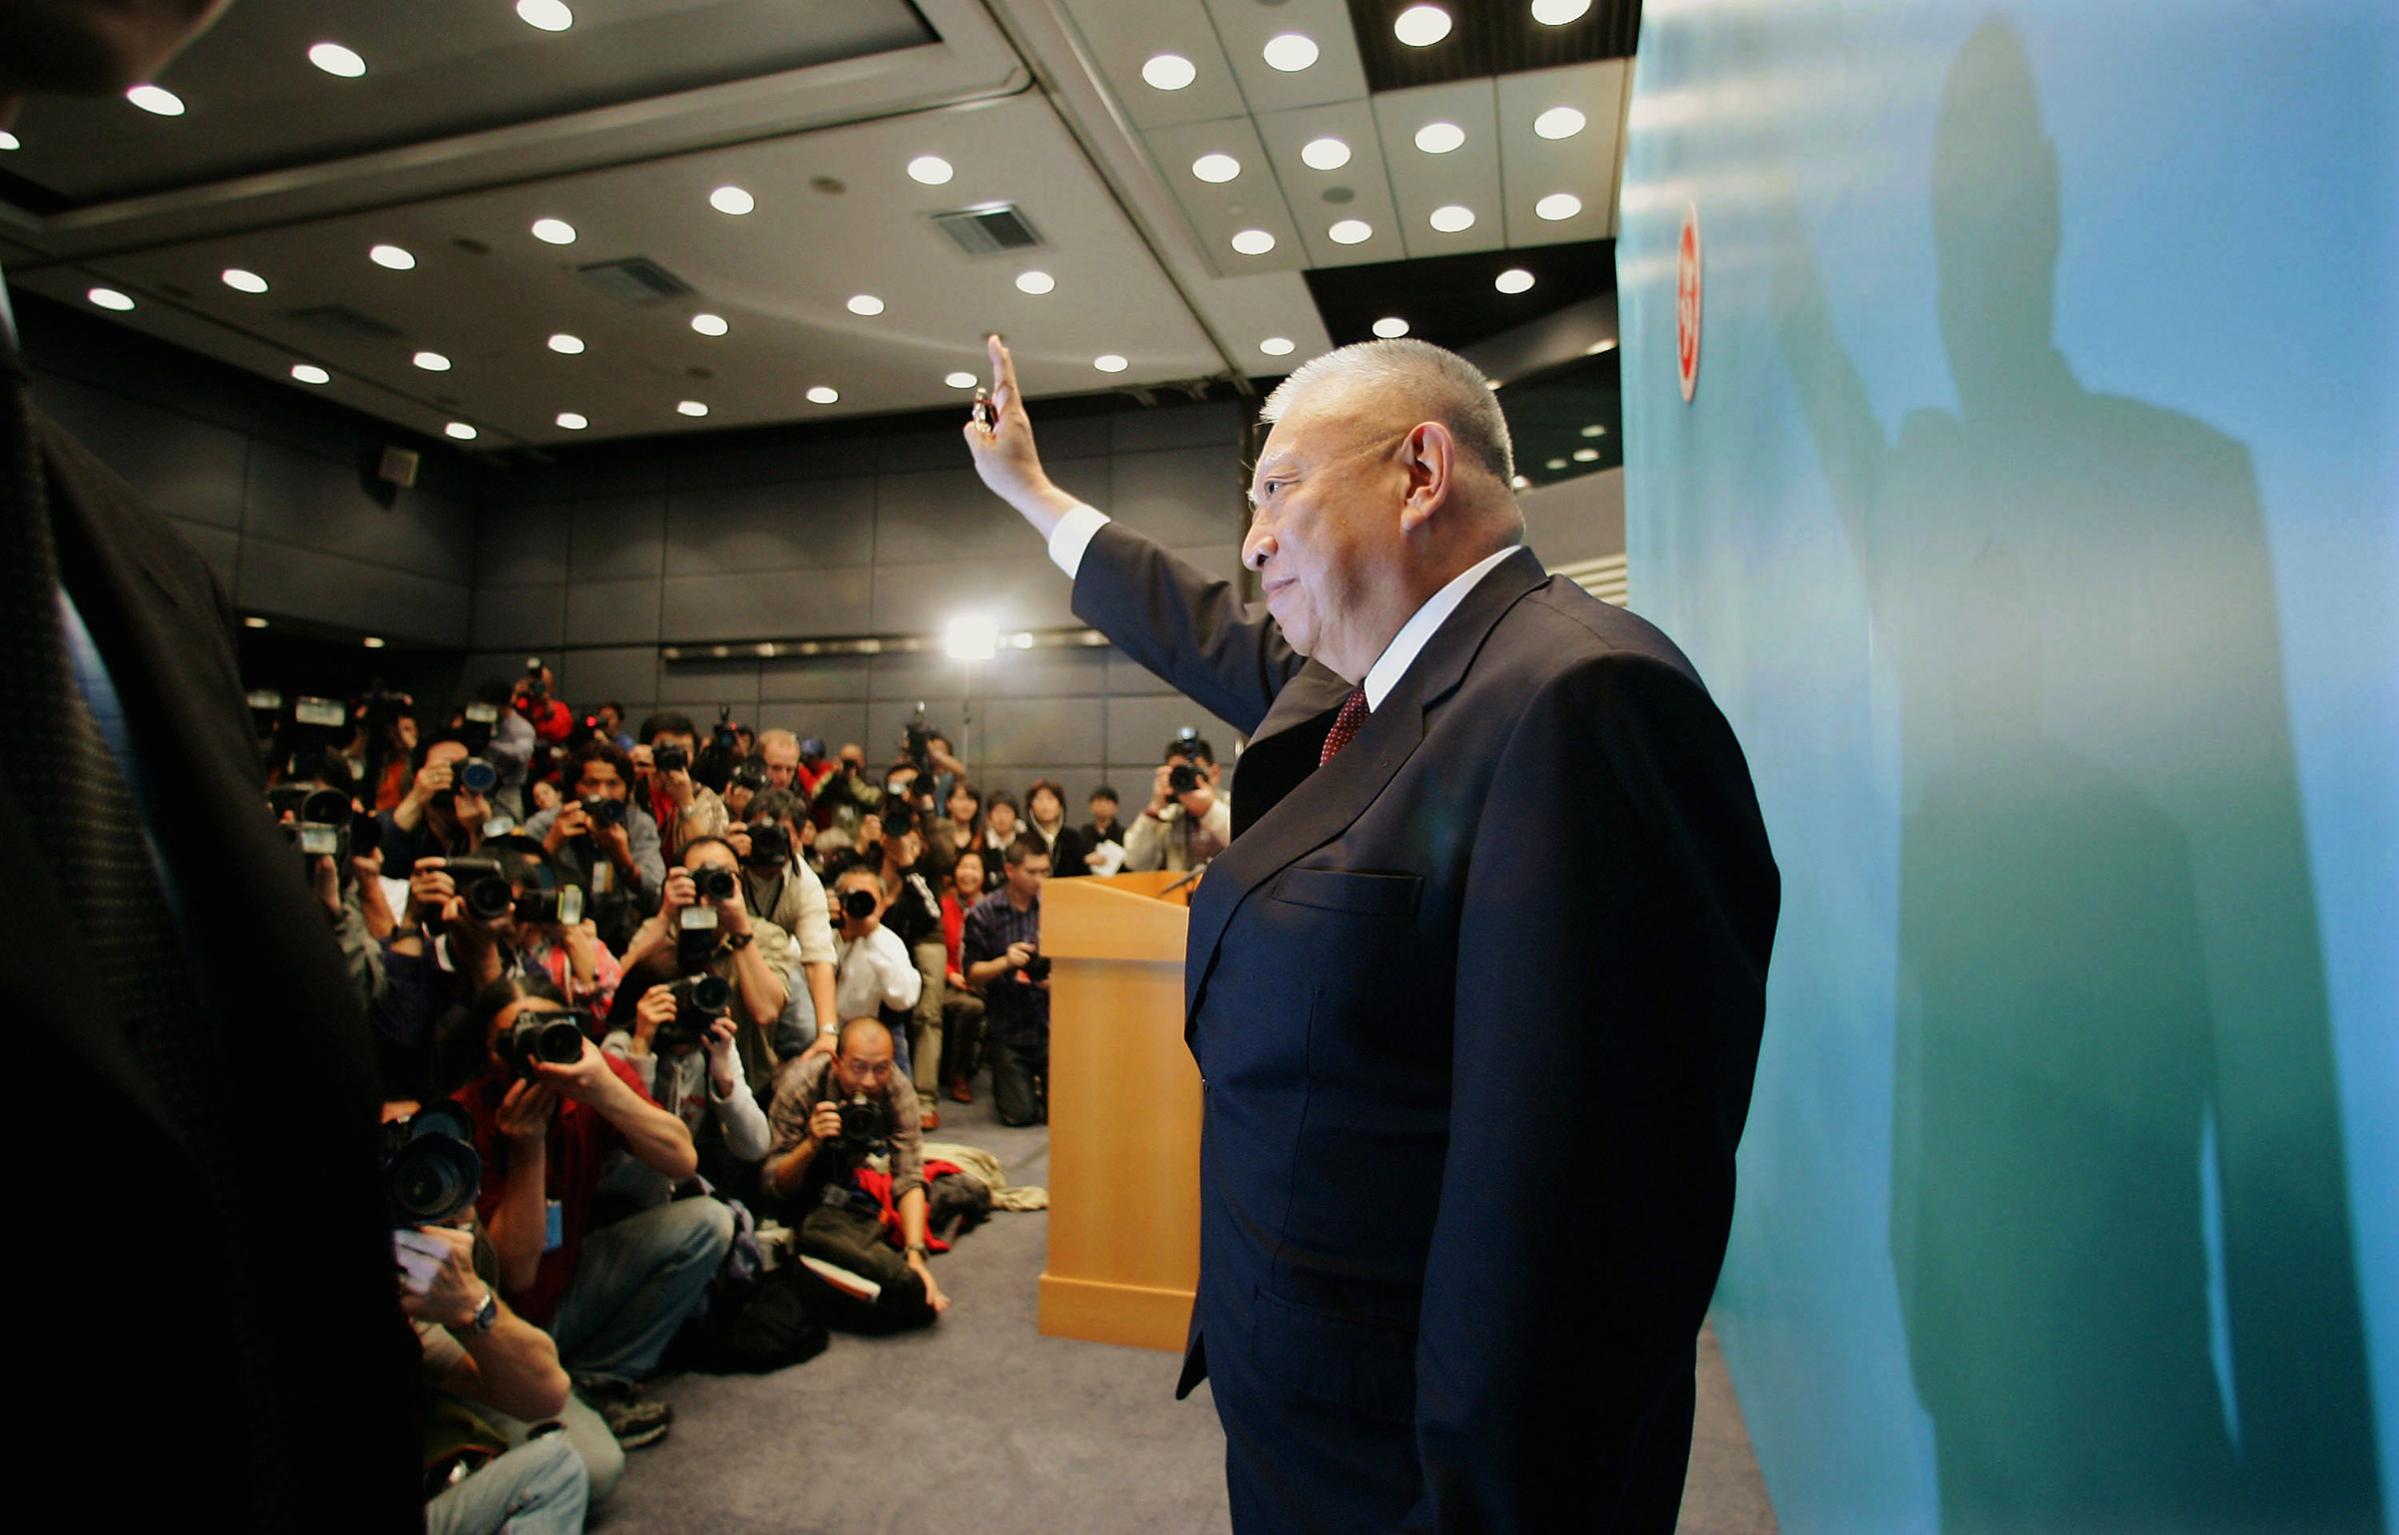 Hong Kong Chief Executive Tung Chee-hwa leaves a news conference after announcing his resignation on March 10, 2005. Tung cited health reasons for cutting short an eight-year tenure plagued by economic recession, policy blunders and unease over China's interference.